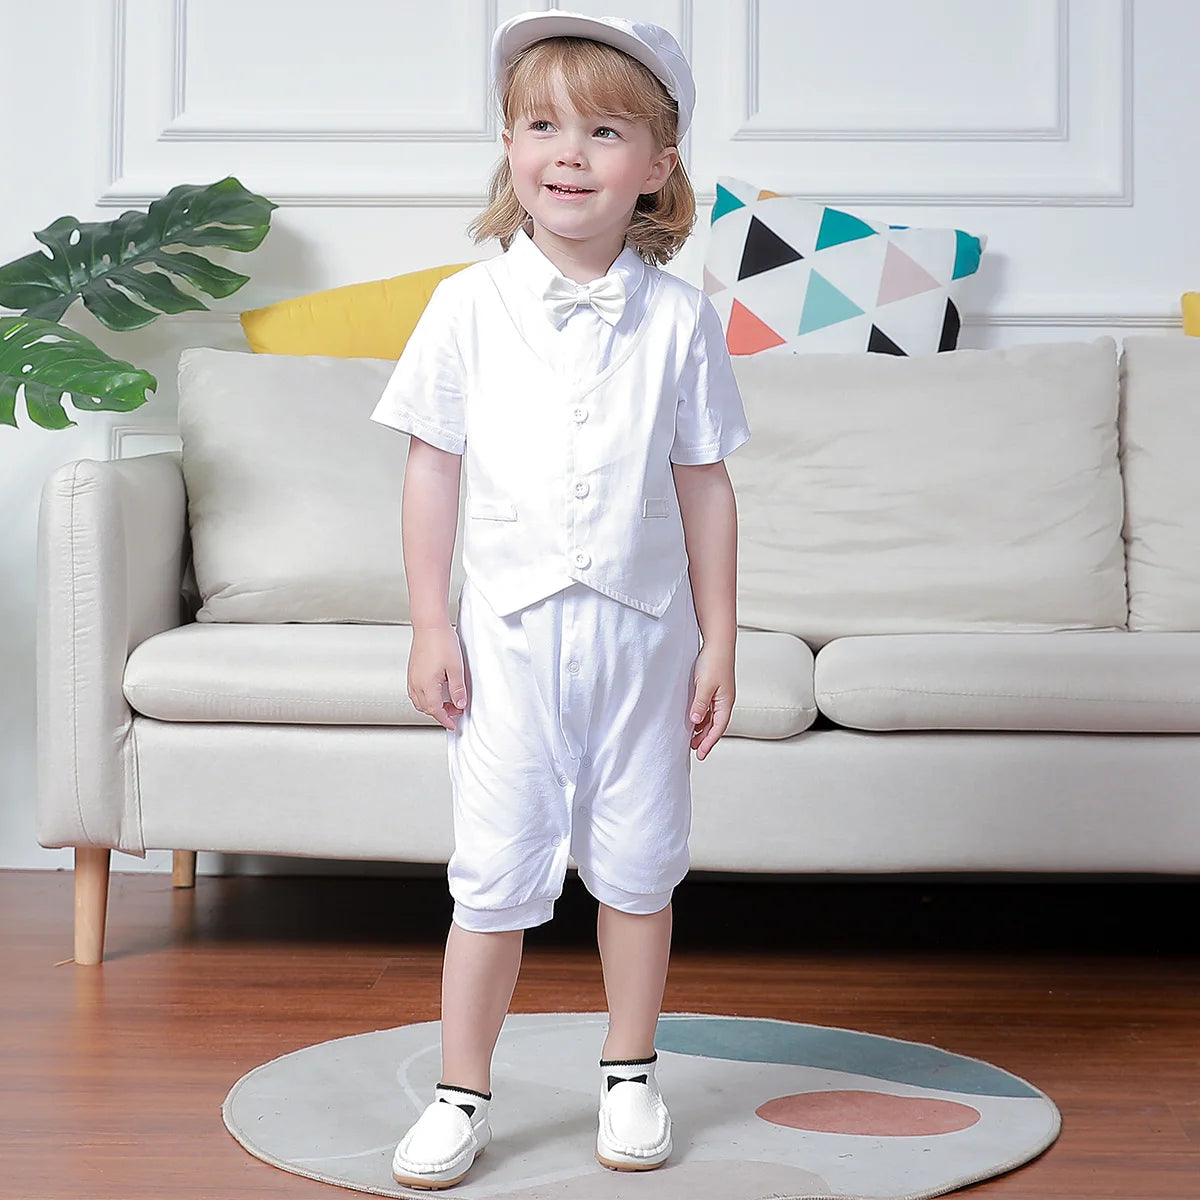 Baby Boys Christening Romper Newborn White One-Pieces Short Sleeve Summer Clothes Baptism Gift with Hat + Shoes + Socks 4PCS